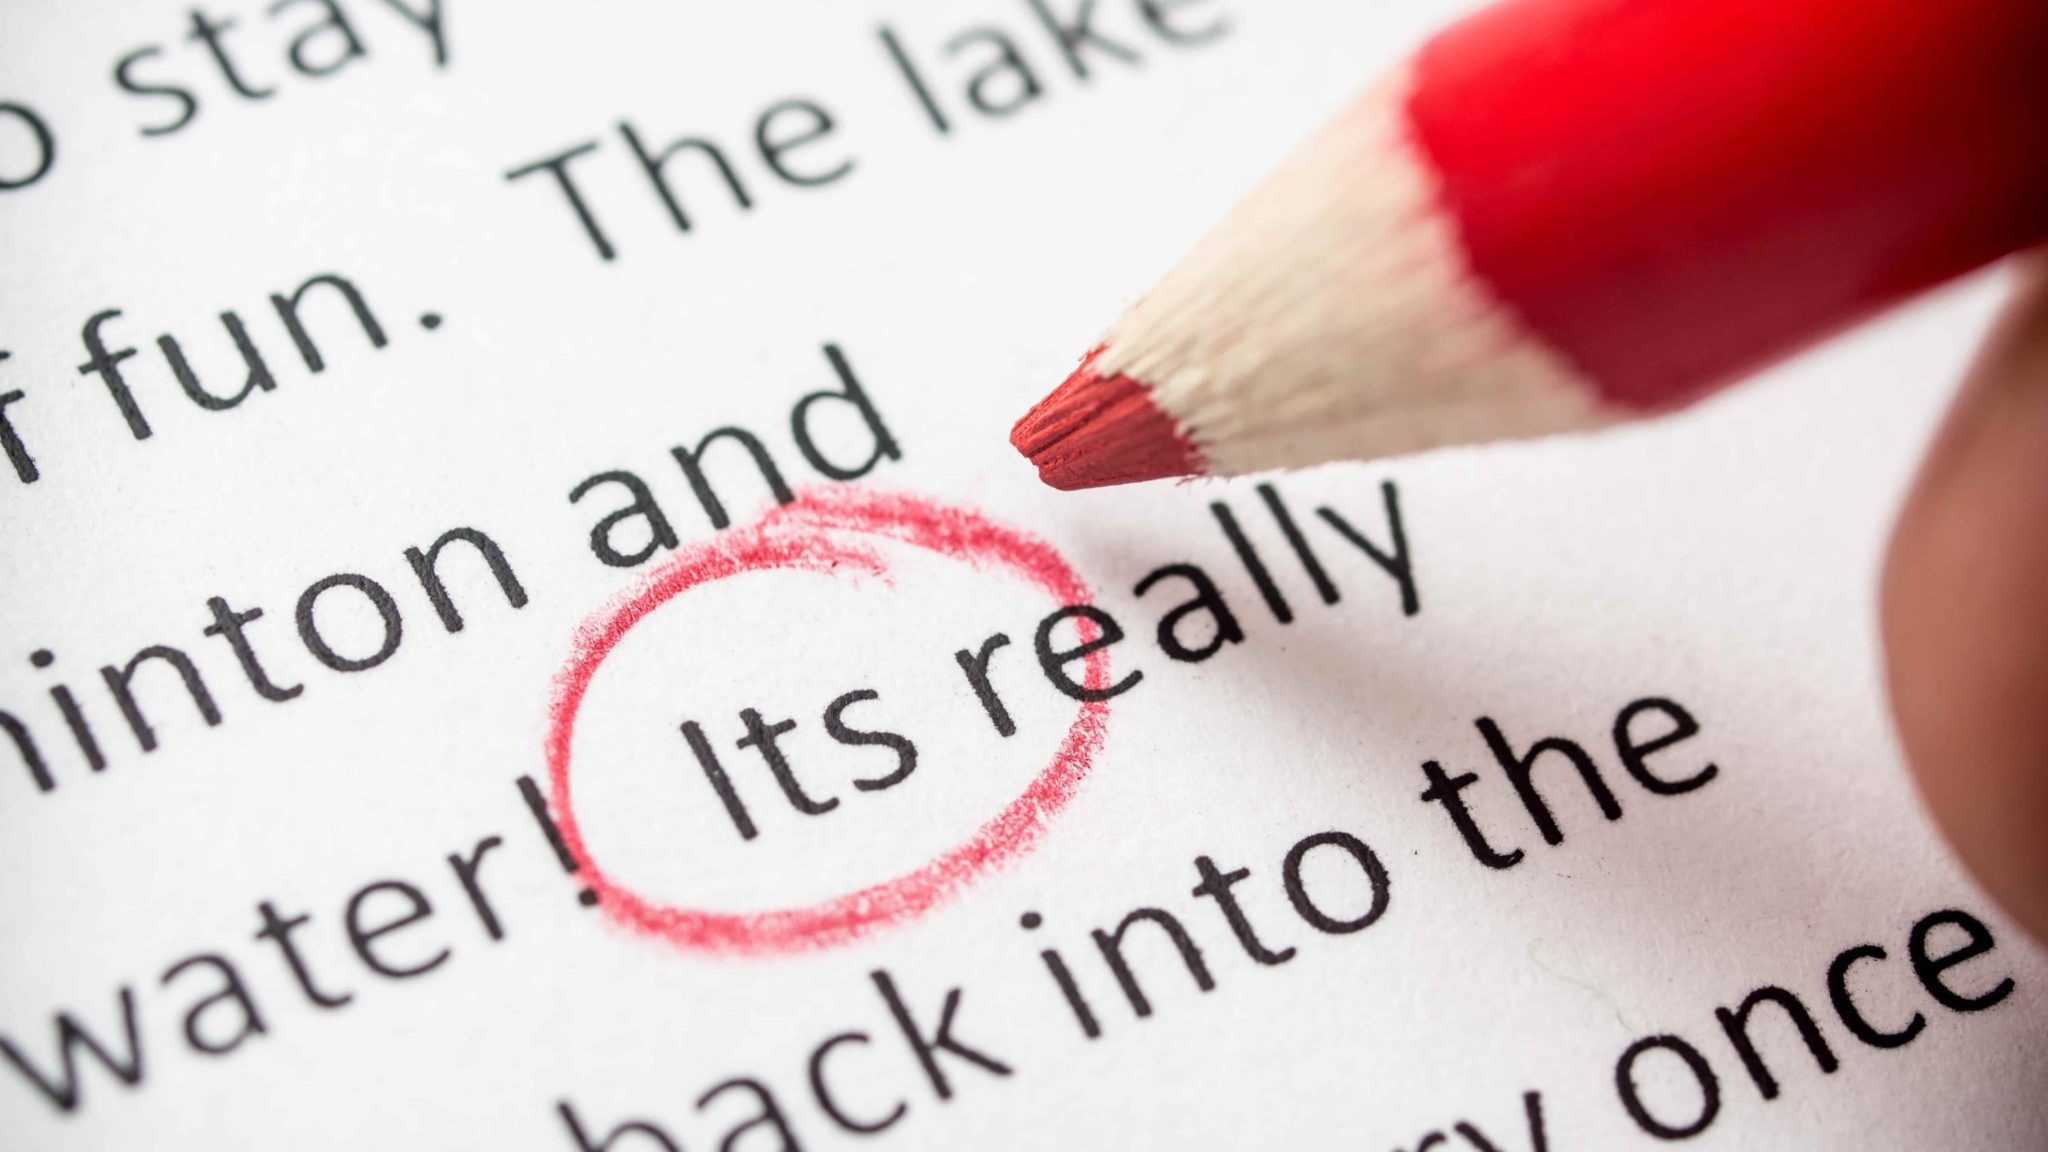 proofreading your writing